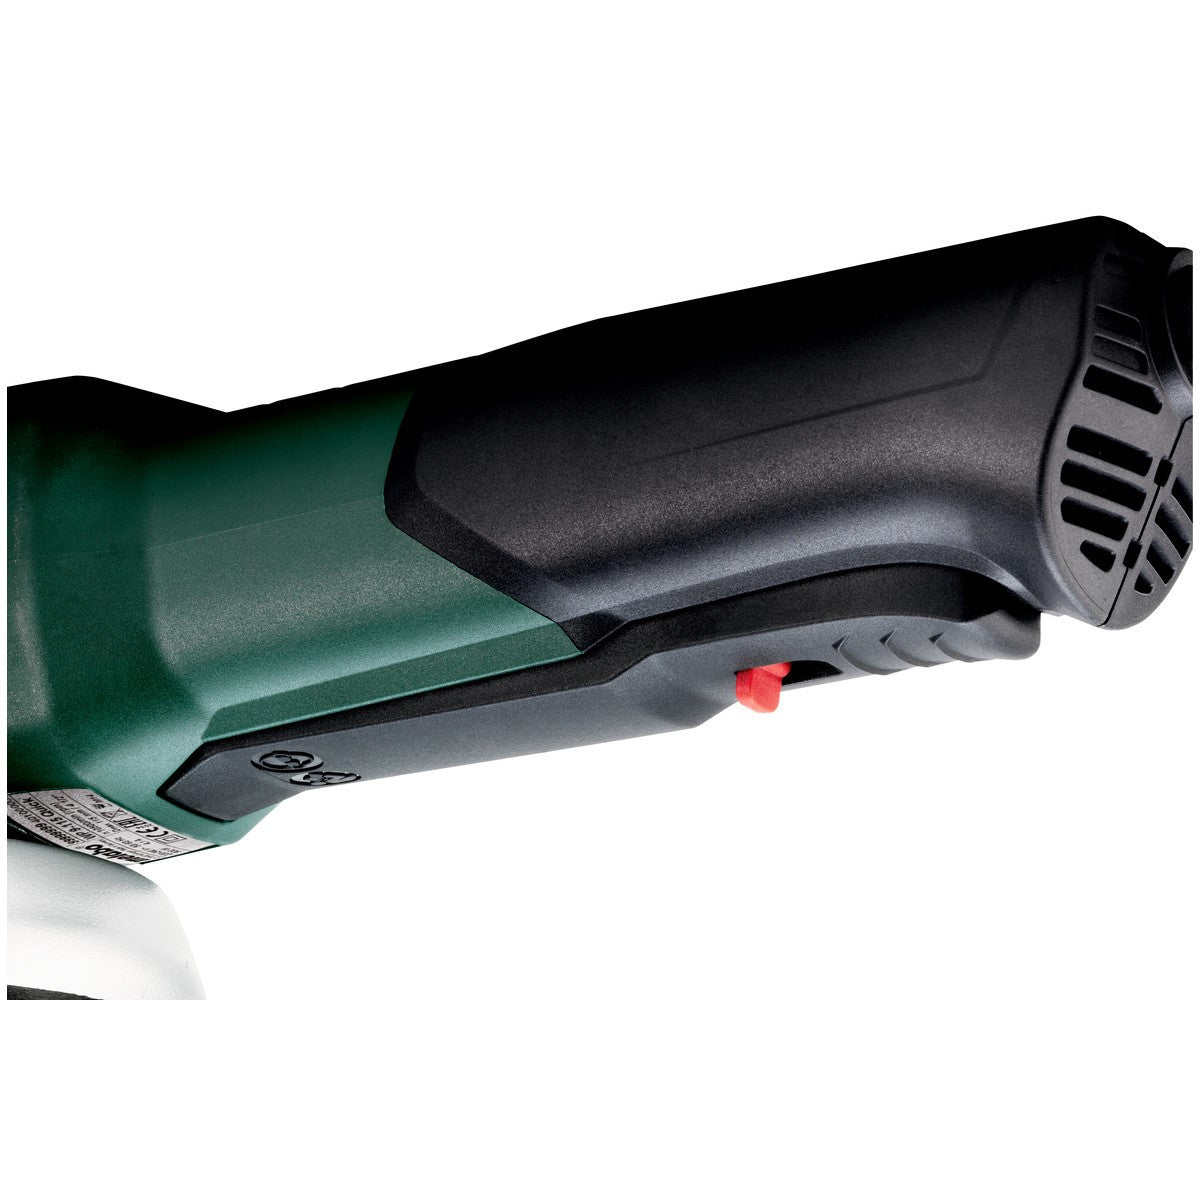 Metabo (603629420) 5 inch Angle Grinder w NonLock Paddle Switch image 4 of 4